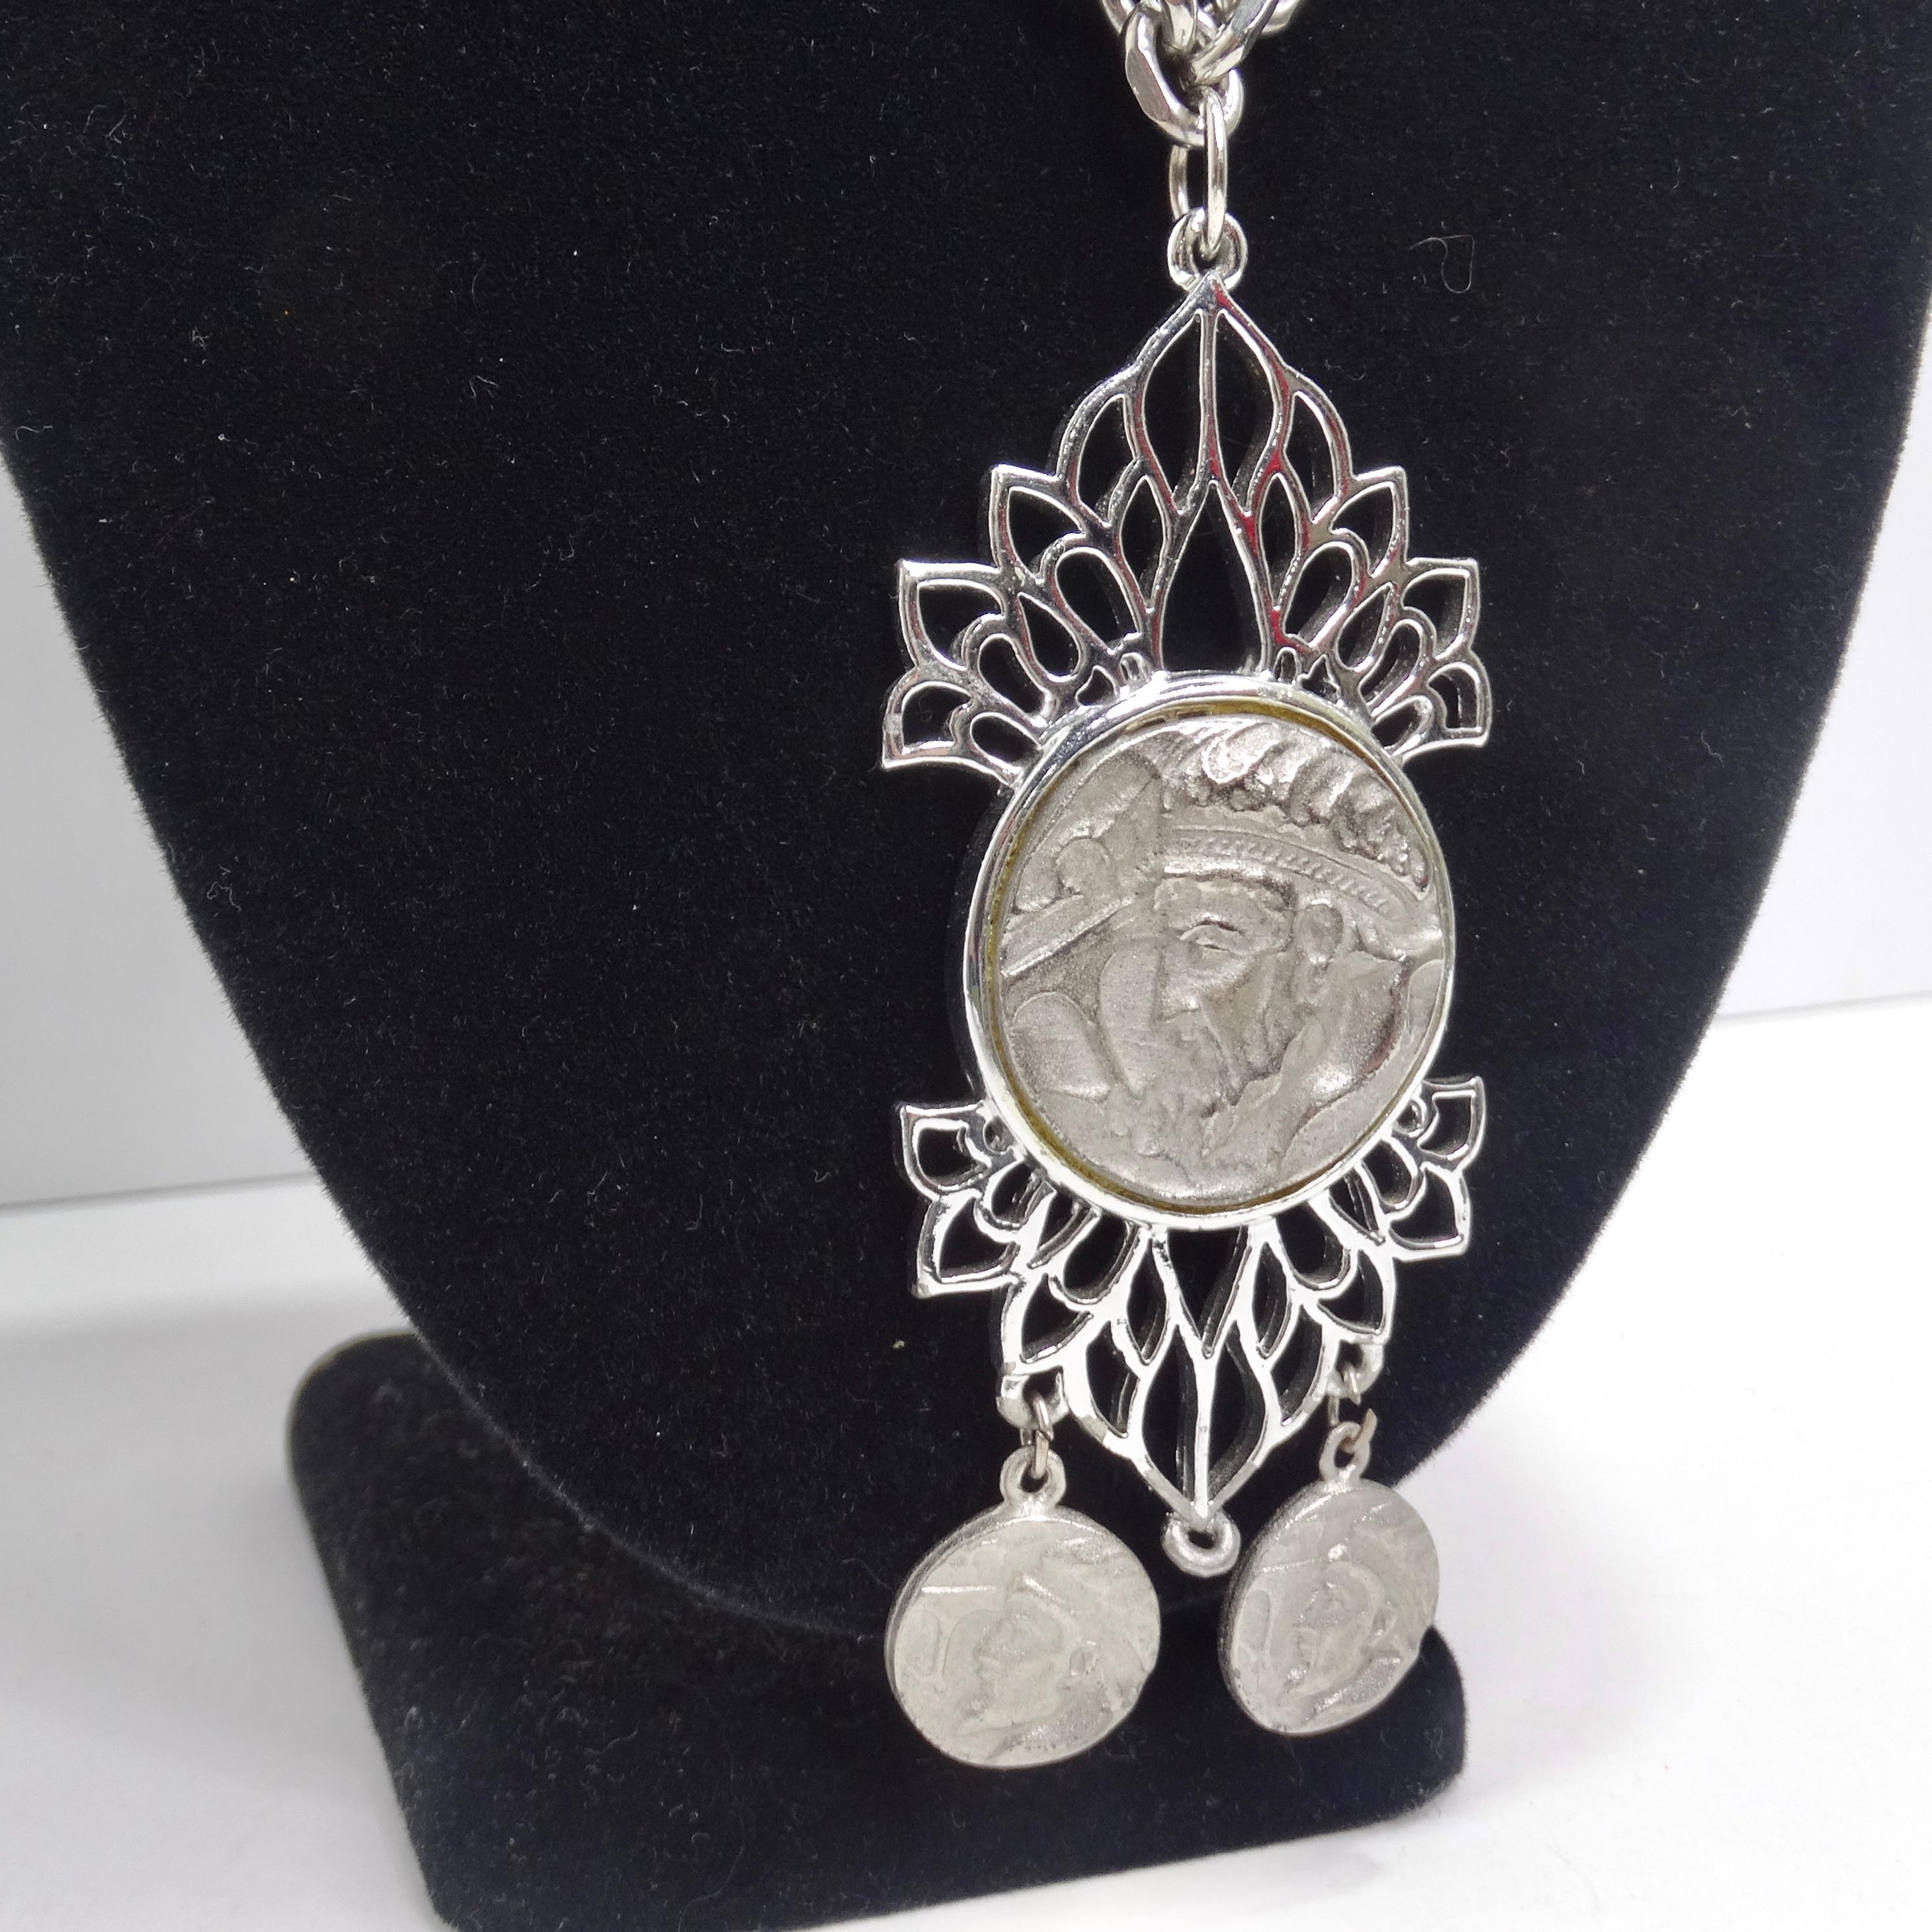 Elevate your style and transport yourself to ancient times with our remarkable Silver Plated Roman Coin Medallion Pendant Necklace. This striking piece of jewelry combines a silver chain with a dramatic Roman coin medallion pendant featuring